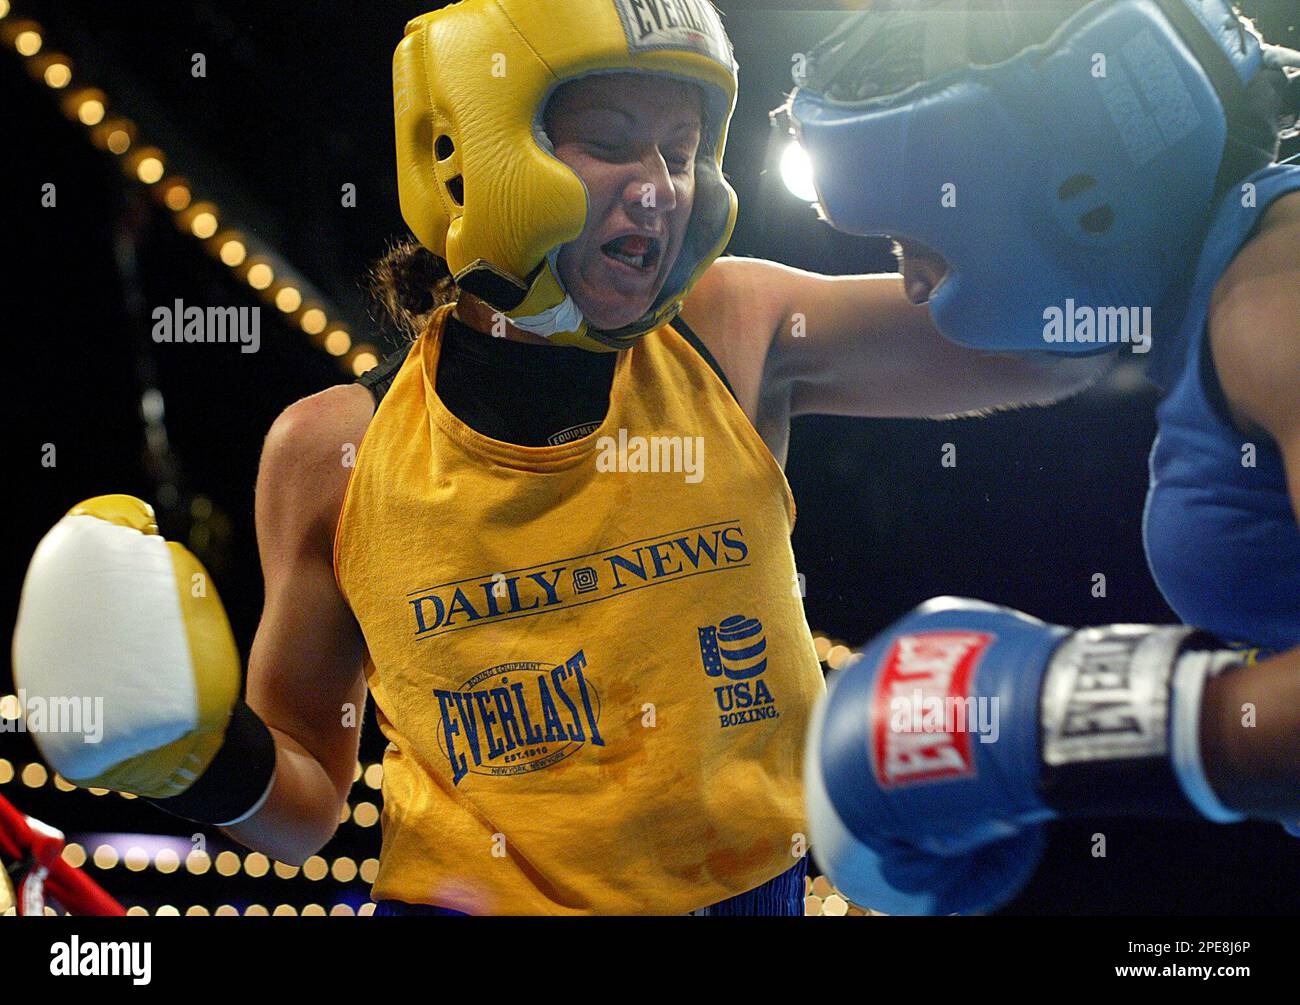 Maureen Shea, left, fights Ronica Jeffrey during a Golden Gloves tournament Friday, April 8, 2005, in New York